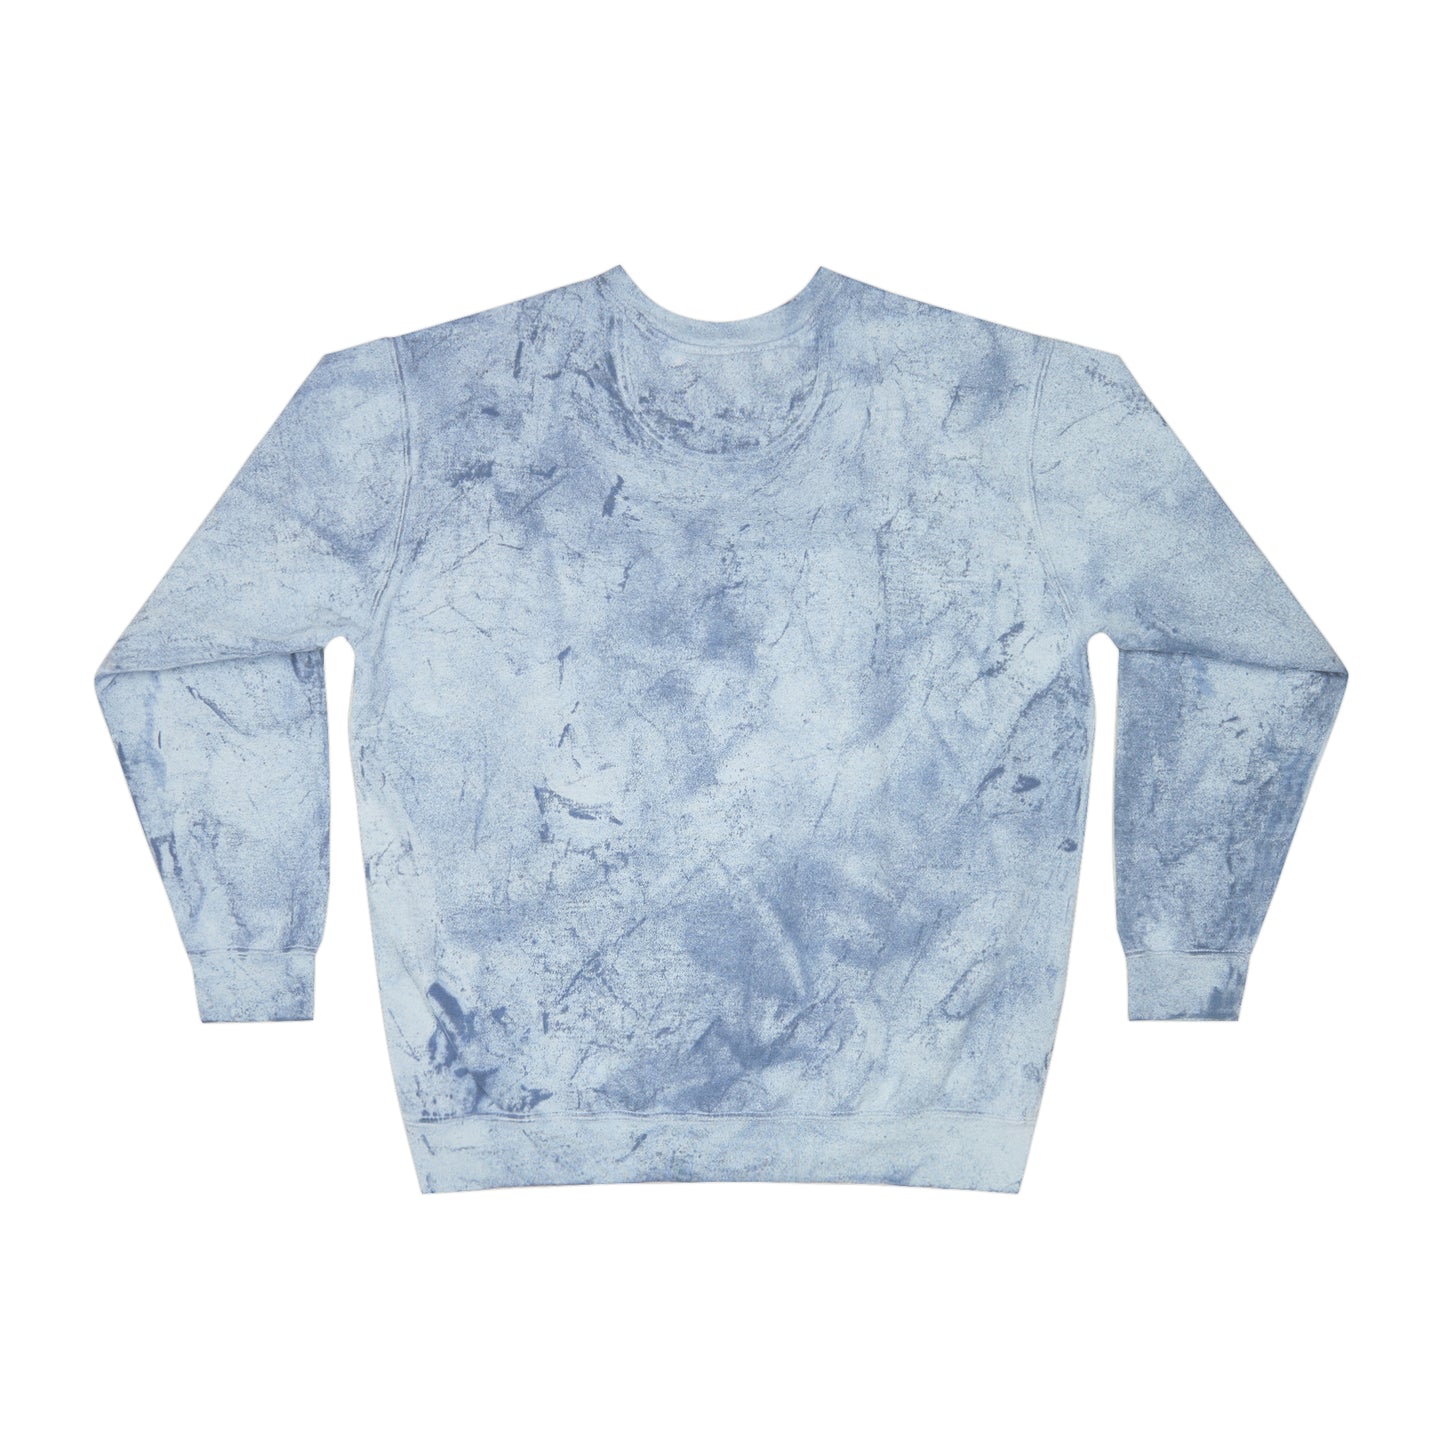 Radiant Hues Crew Neck from Made with Love